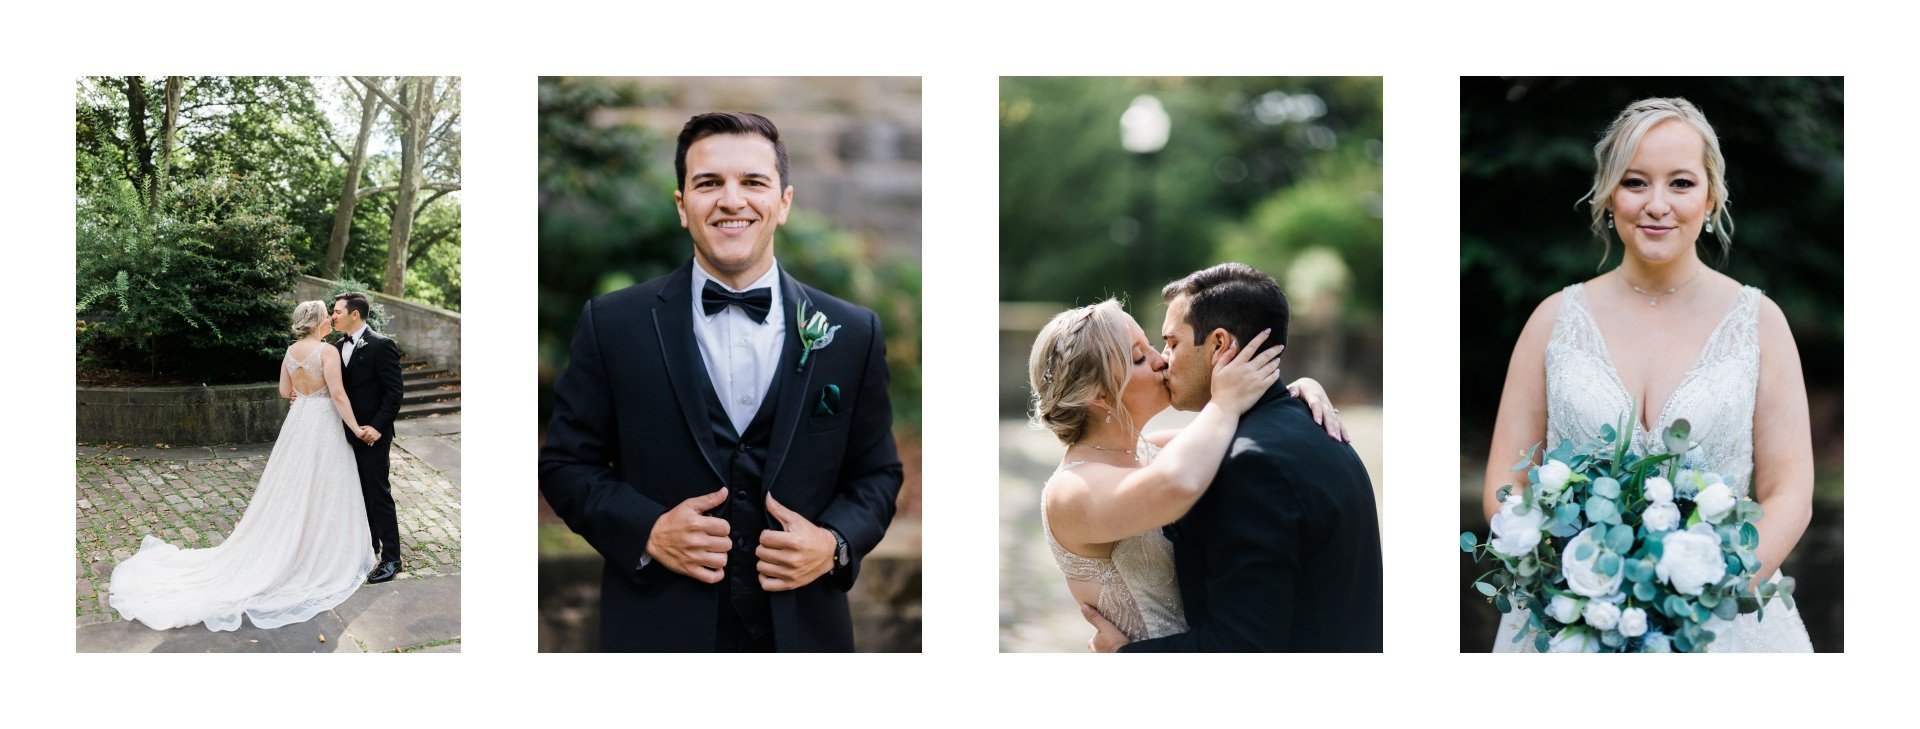 Cleveland Wedding Photographer at Windows on the River 01 37.jpg